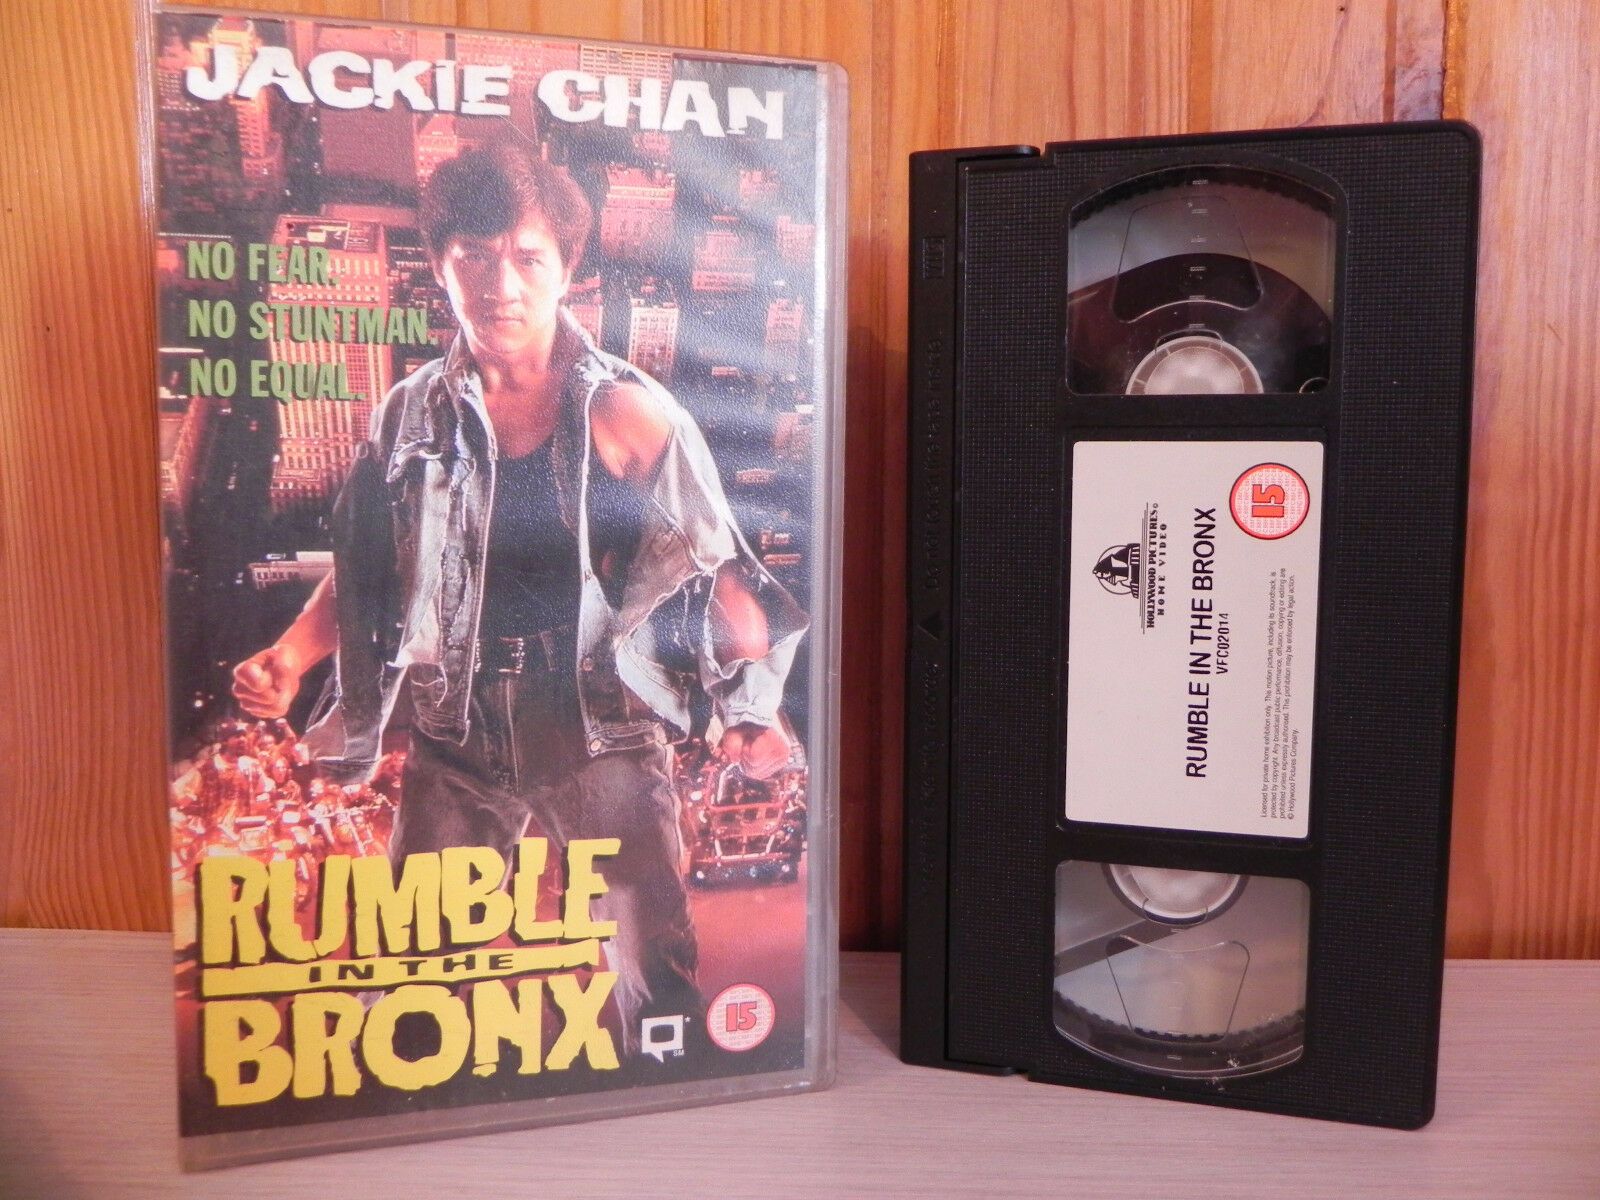 Rumble In The Bronx - Jackie Chan - No Stunt Man - No Fear Kung-Fu - VHS - Video-